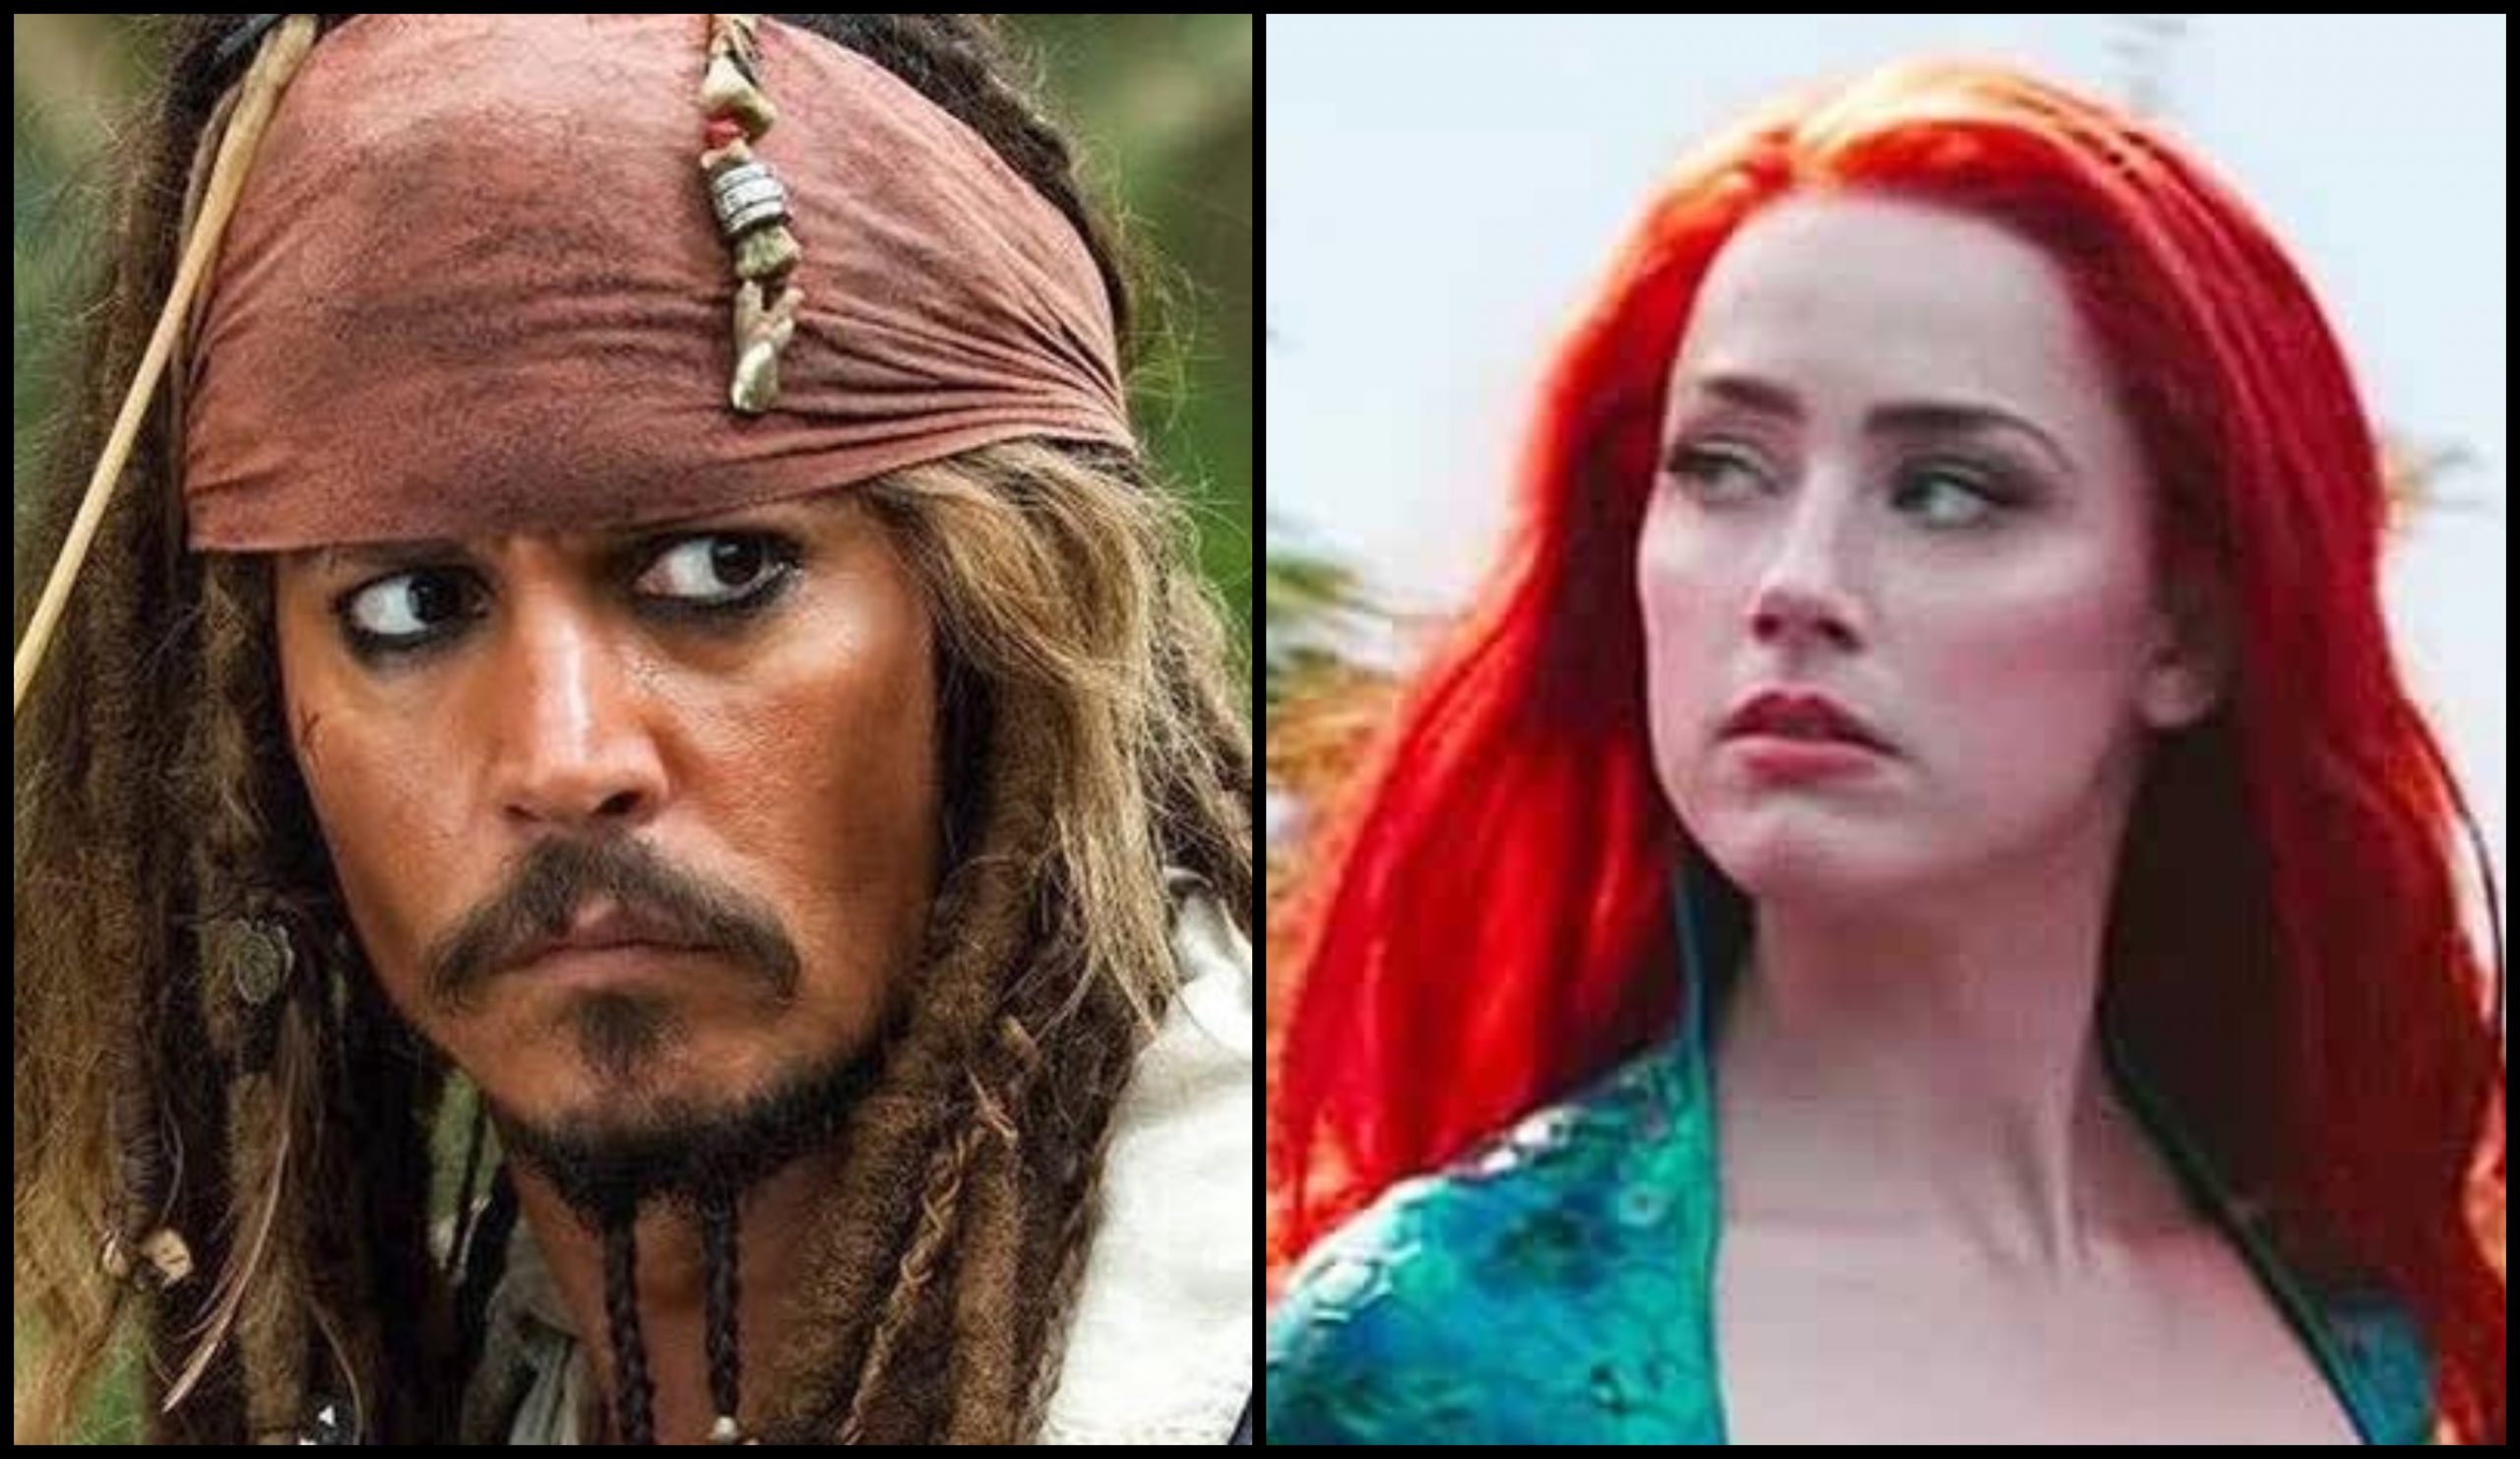 Amber Heard May Face Jail Time if Found Guilty of Faking Evidence of Abuse by Johnny Depp